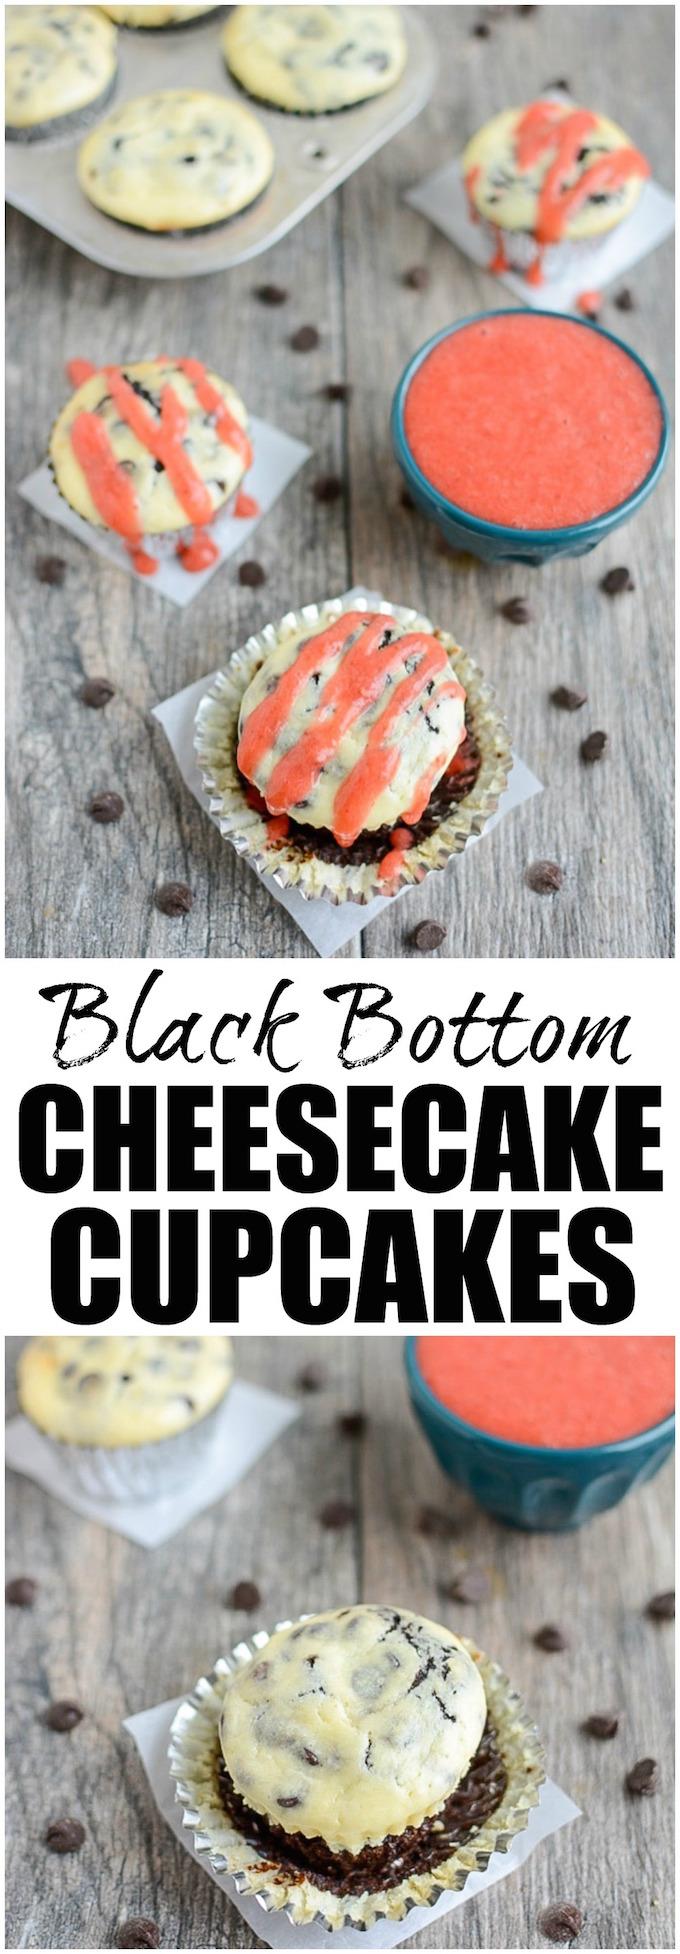 These Black Bottom Cheesecake Cupcakes are the perfect balance of chocolate cupcake on the bottom and cheesecake on the top! It's like two desserts in every bite! Top them with a simple strawberry sauce if desired.